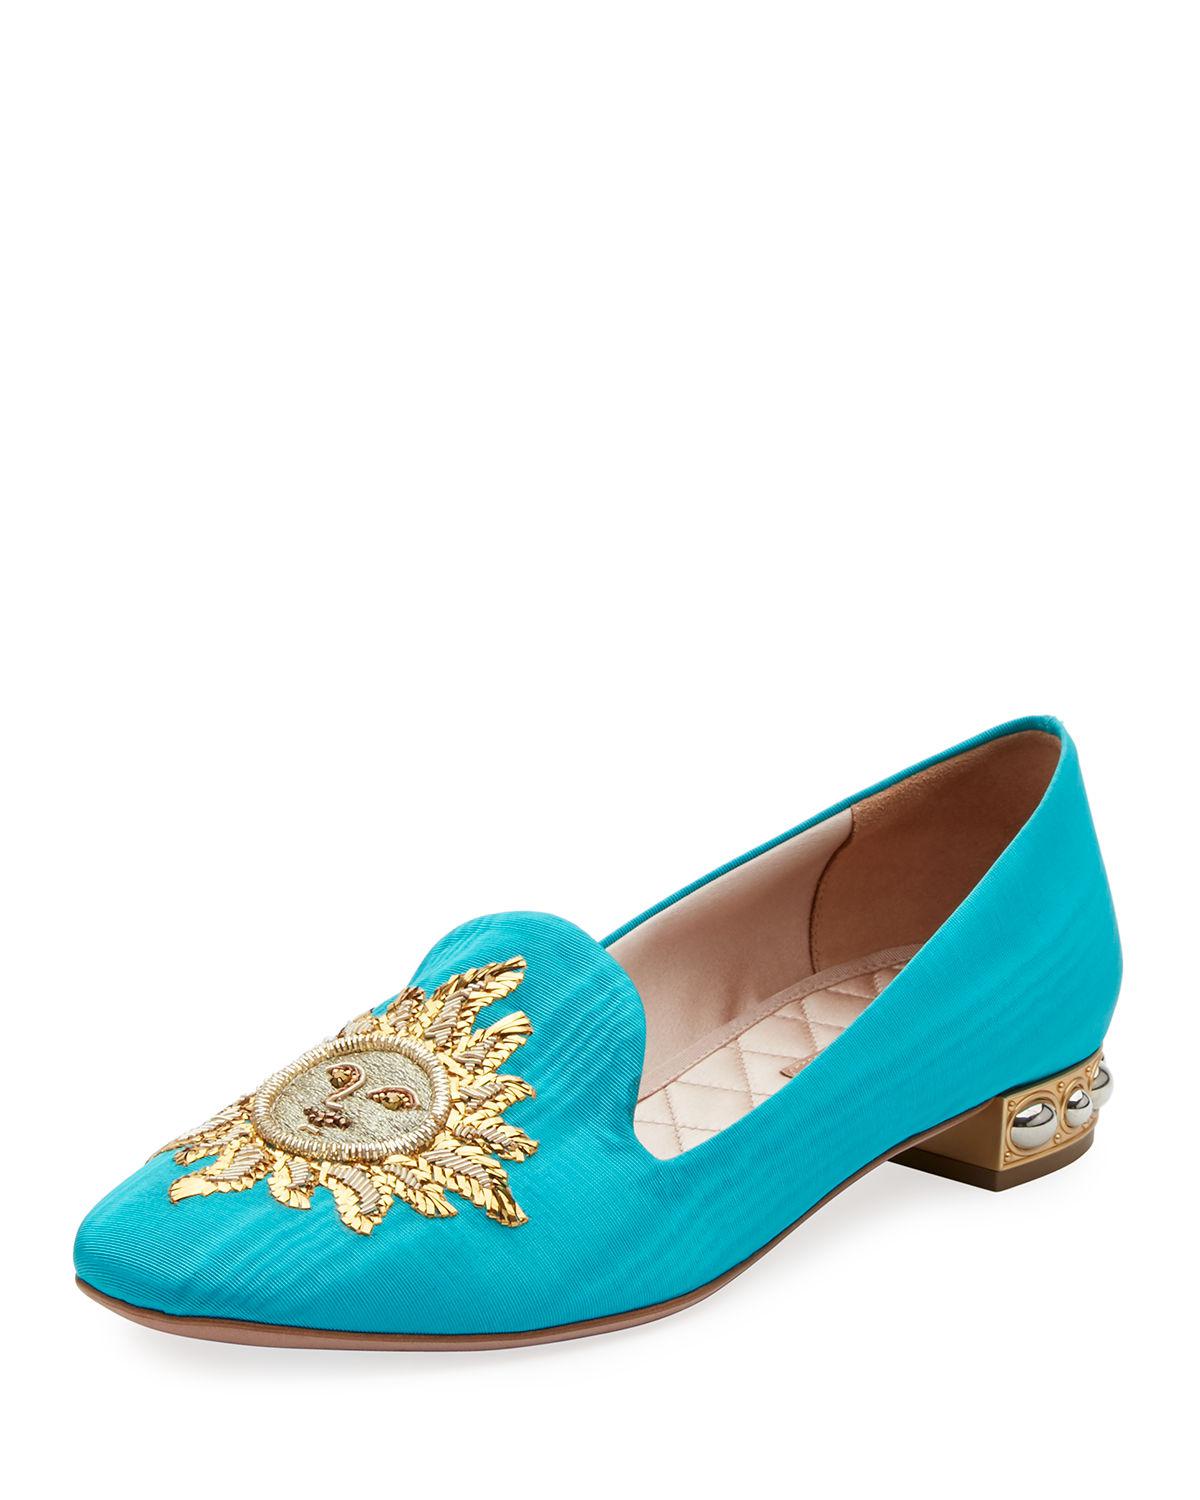 Aquazzura Embroidered Moire Loafer in Blue - Lyst